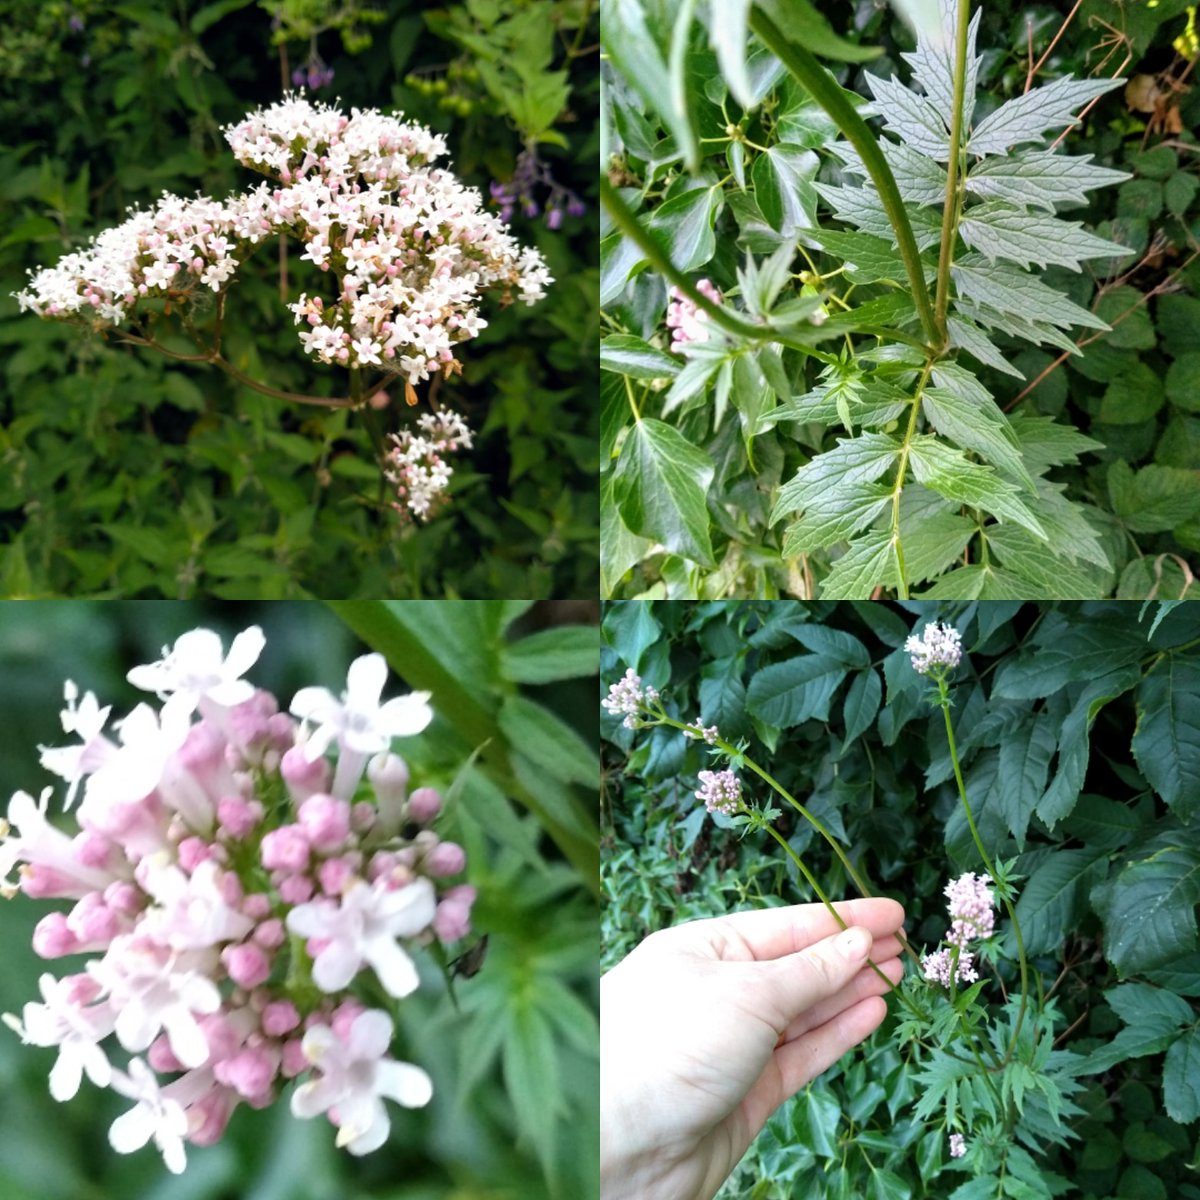 On this morning's hedge-bothering walk I stopped to admire a patch of valerian growing locally.It's easy to miss this at the moment, if you aren't paying attention it can blend in with the meadowsweet that is everywhere now, but a closer look and it's quite different...